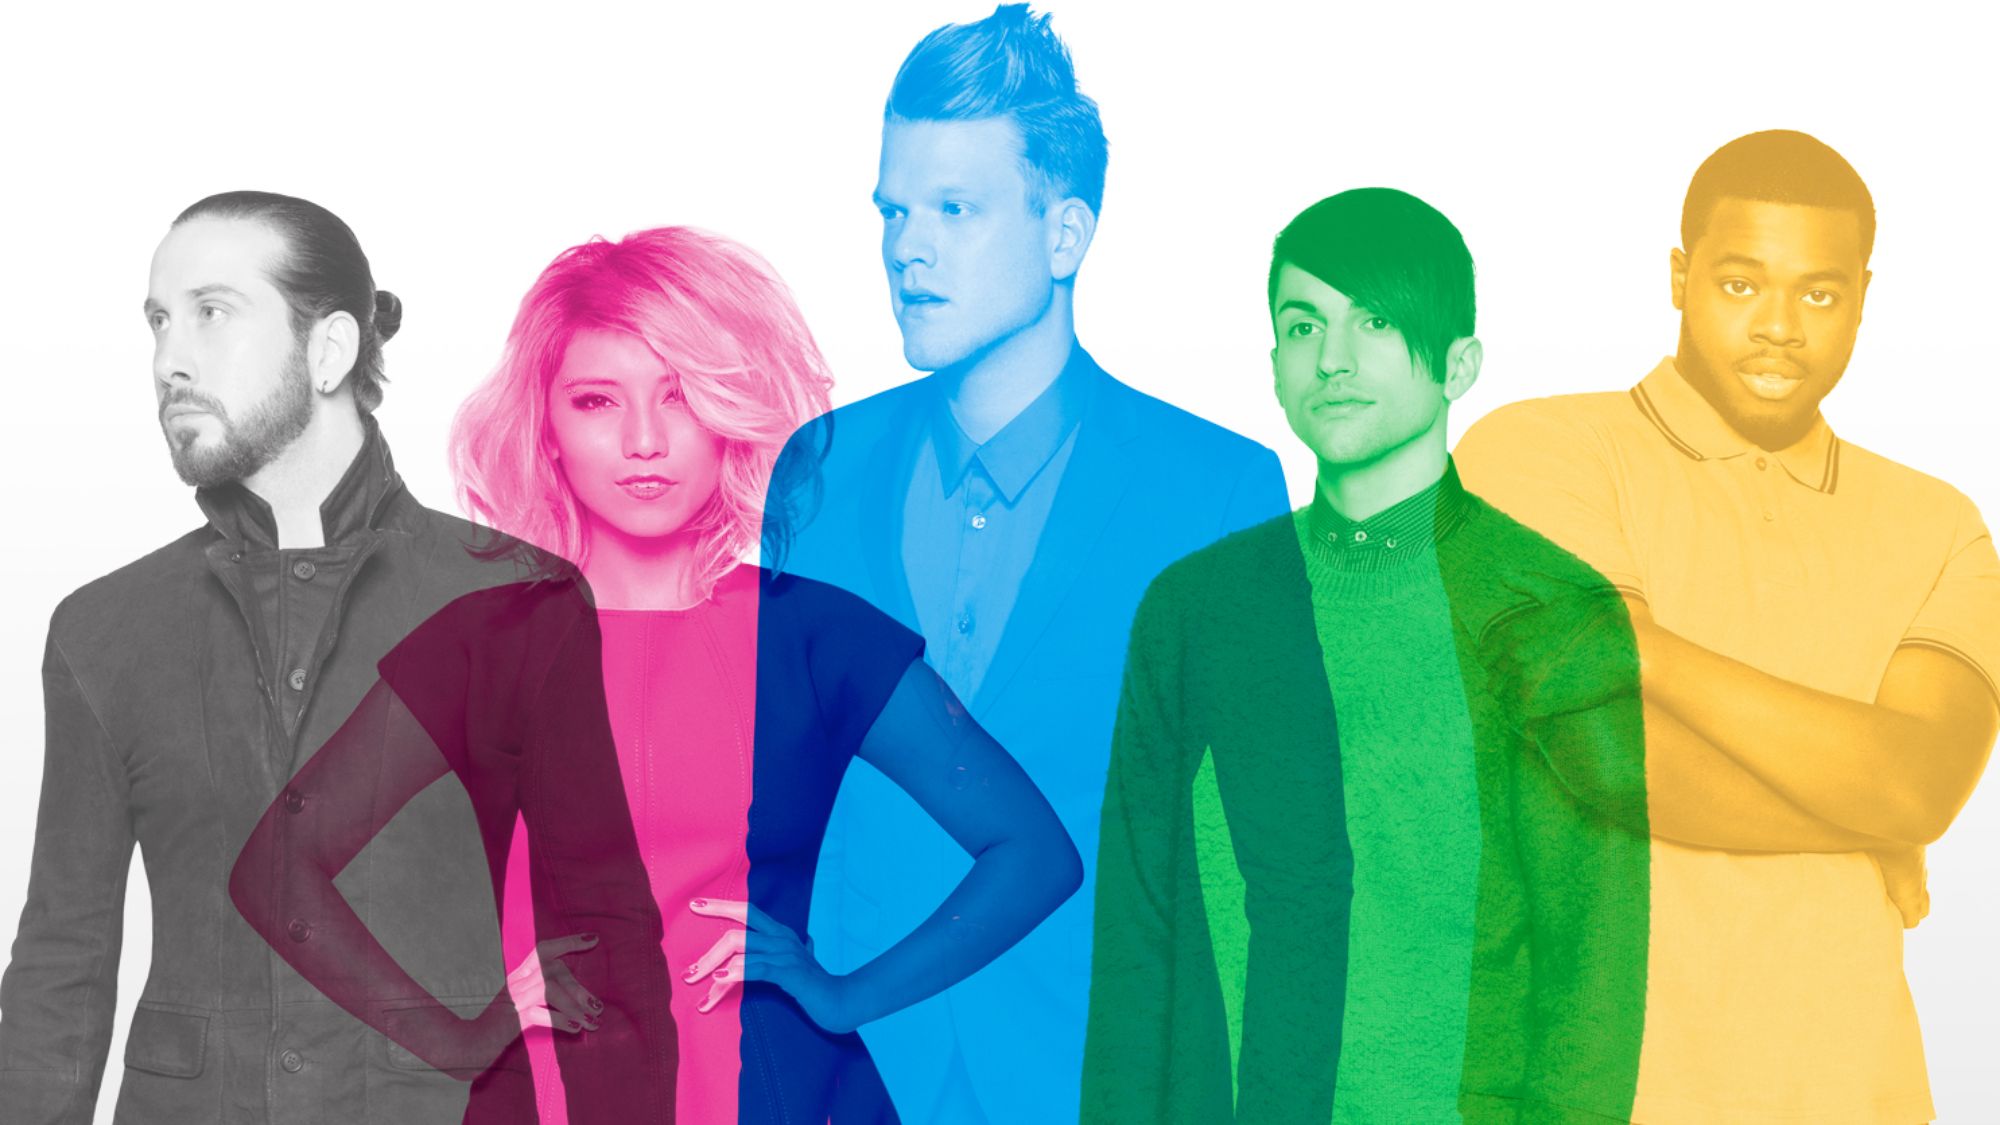 5 Reasons To Watch The Pentatonix Concert This Saturday